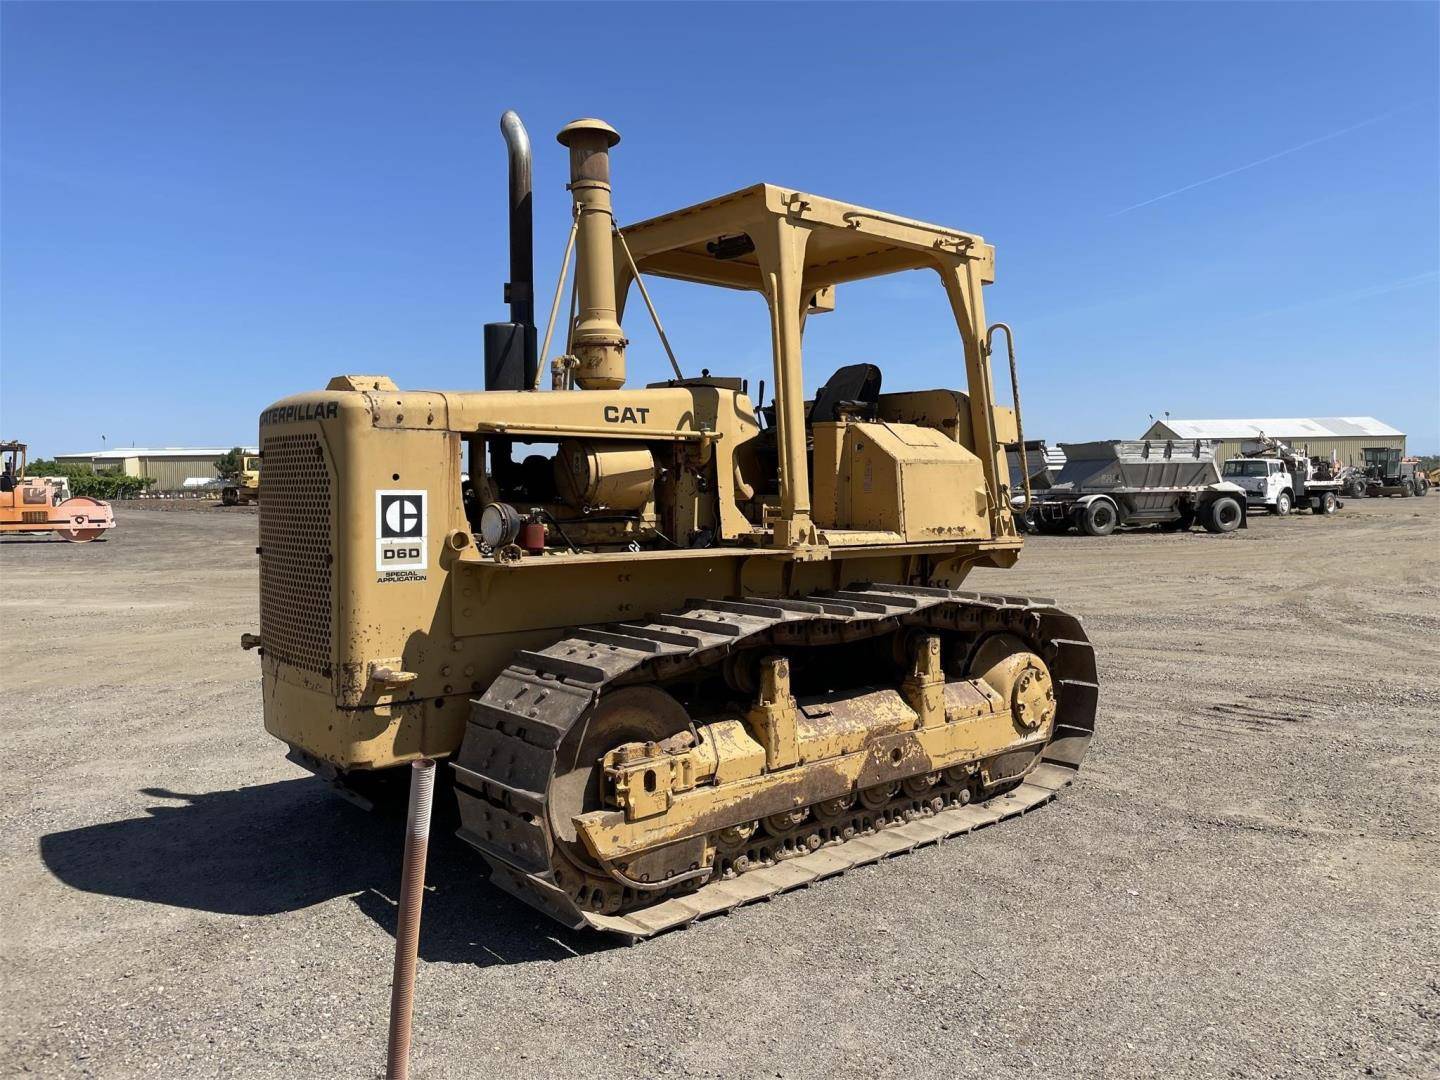 A wide selection of Cat equipment with 32 in stock and available